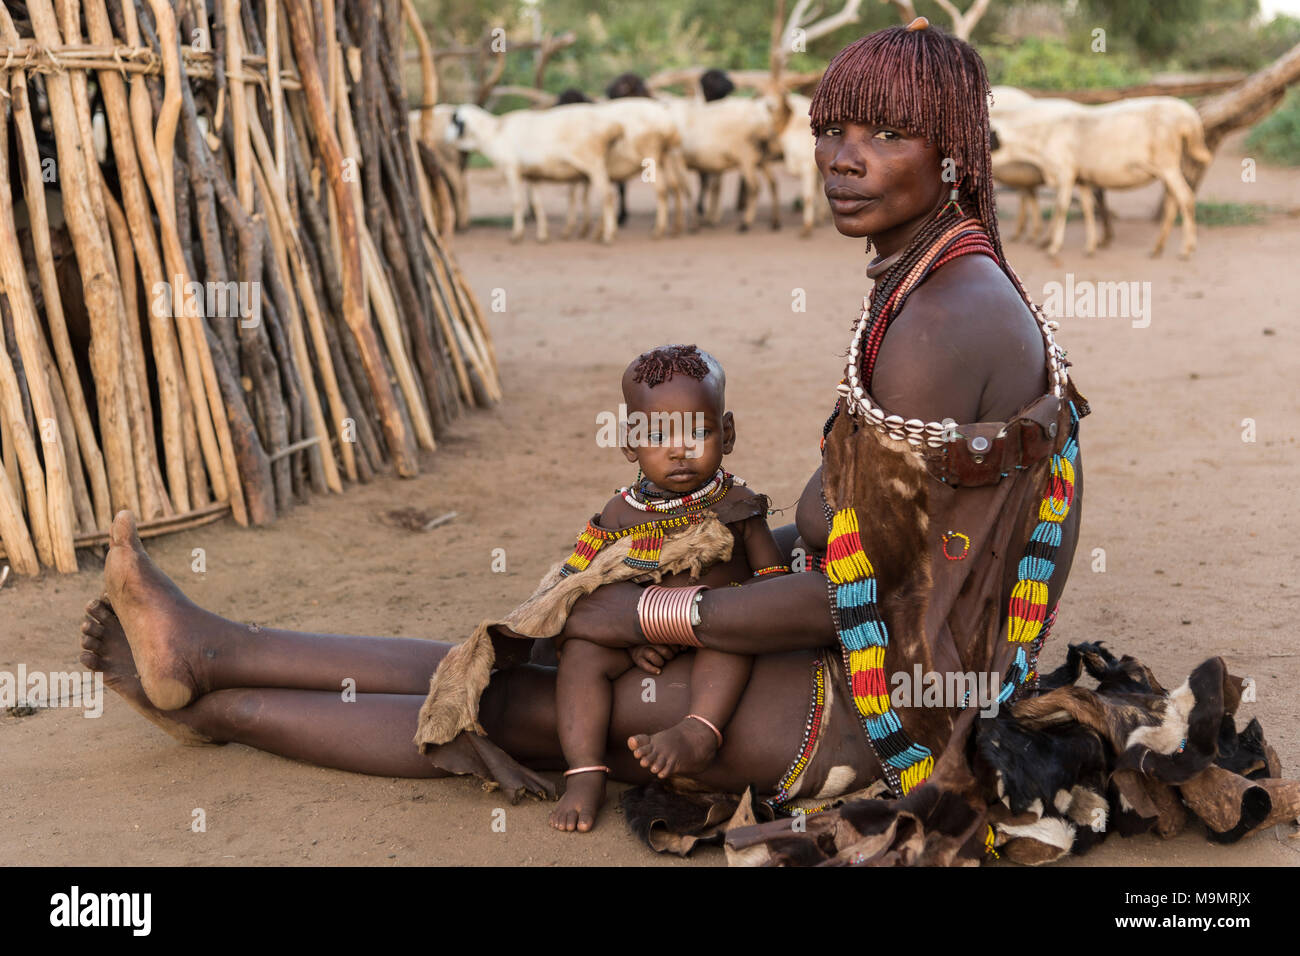 Woman with toddler sitting in front of mud hut on the ground, Hamer tribe, Turmi, region of southern nations, Ethiopia Stock Photo